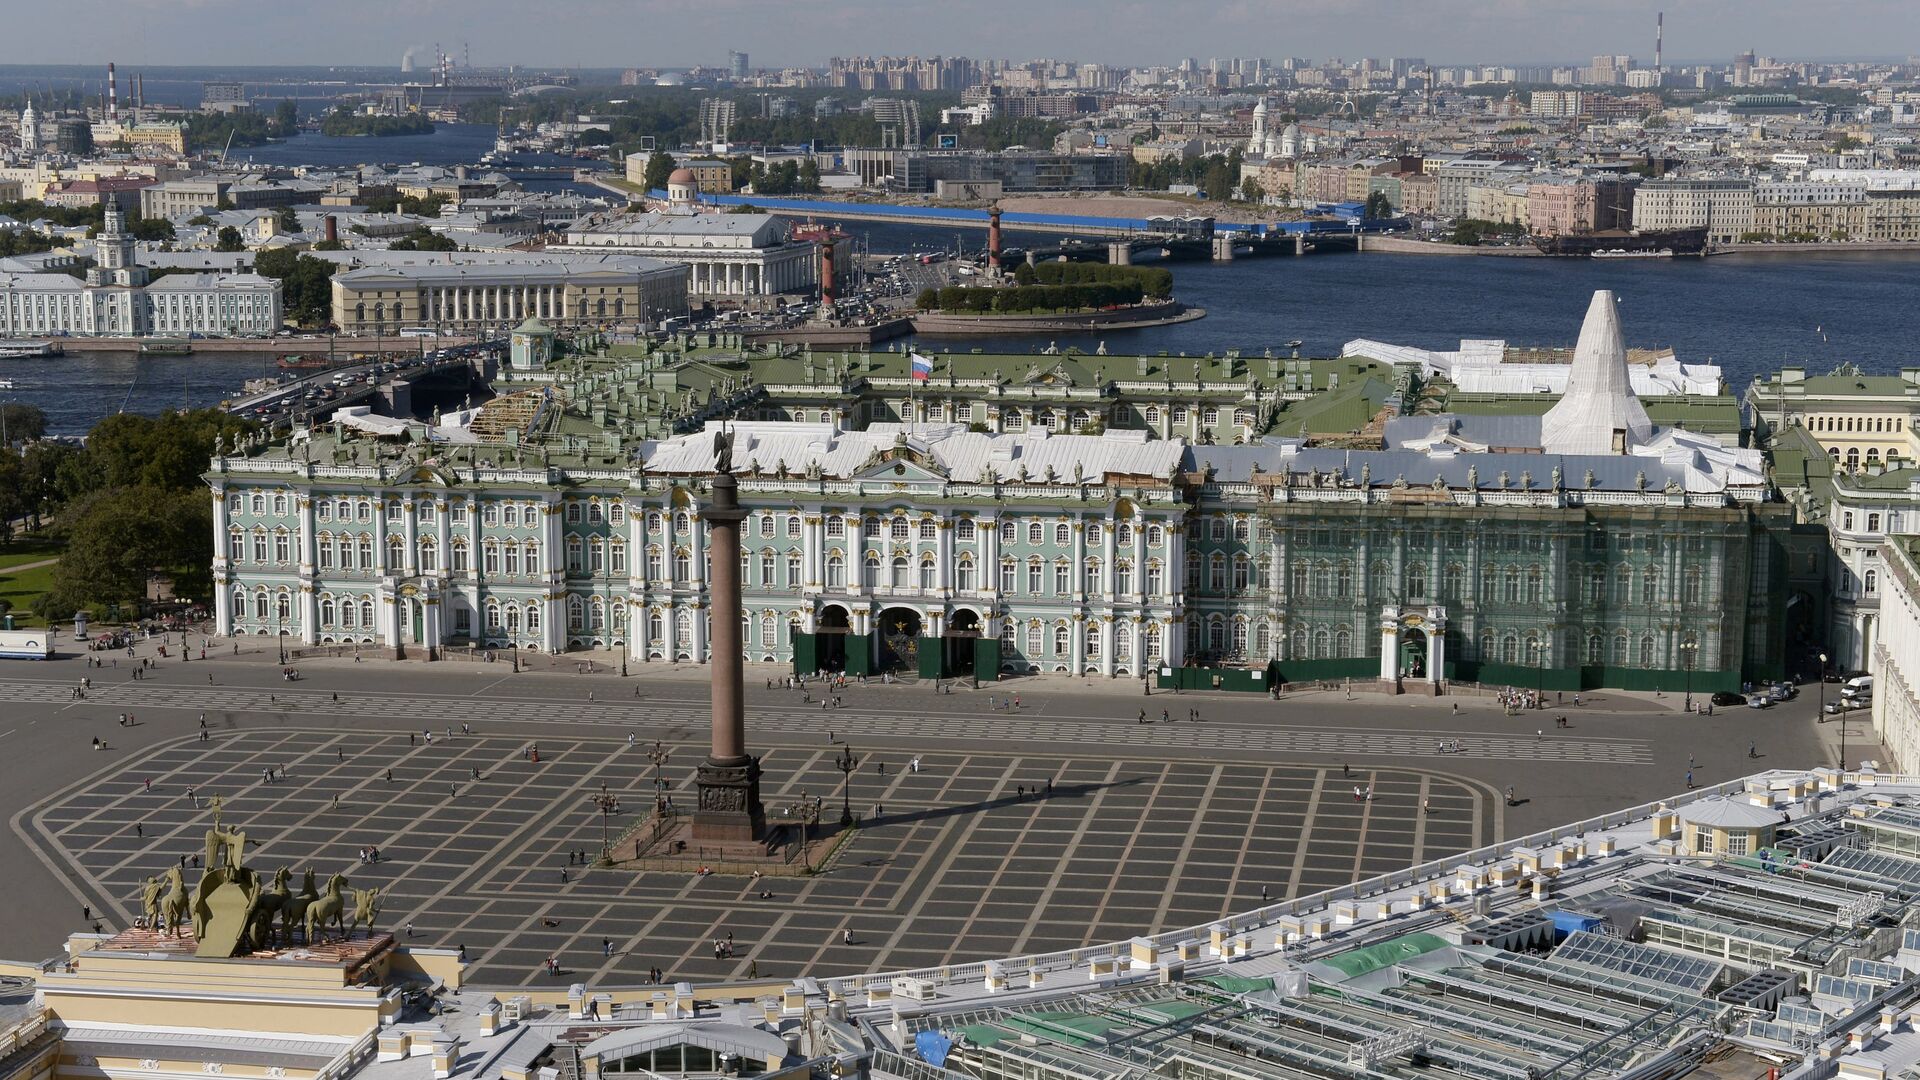 A view of the Palace Square and State Hermitage Museum in St. Petersburg. The photo was taken from a helicopter. - Sputnik International, 1920, 07.04.2022